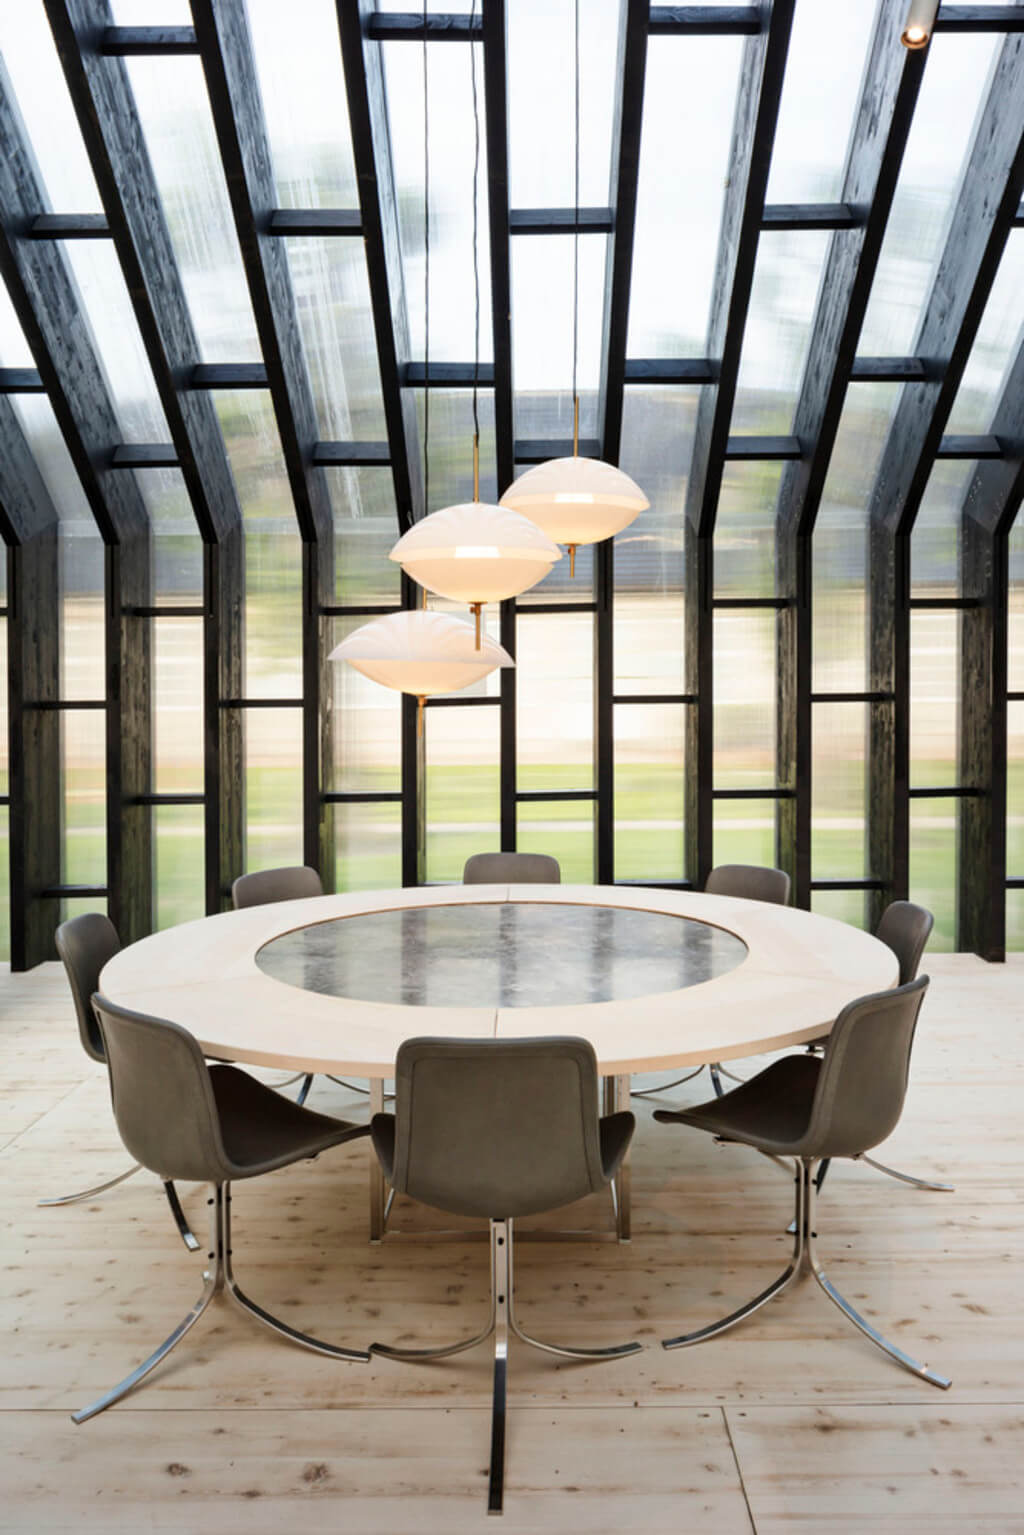 Fritz Hansen Pavilion dining room with a round table and chairs
